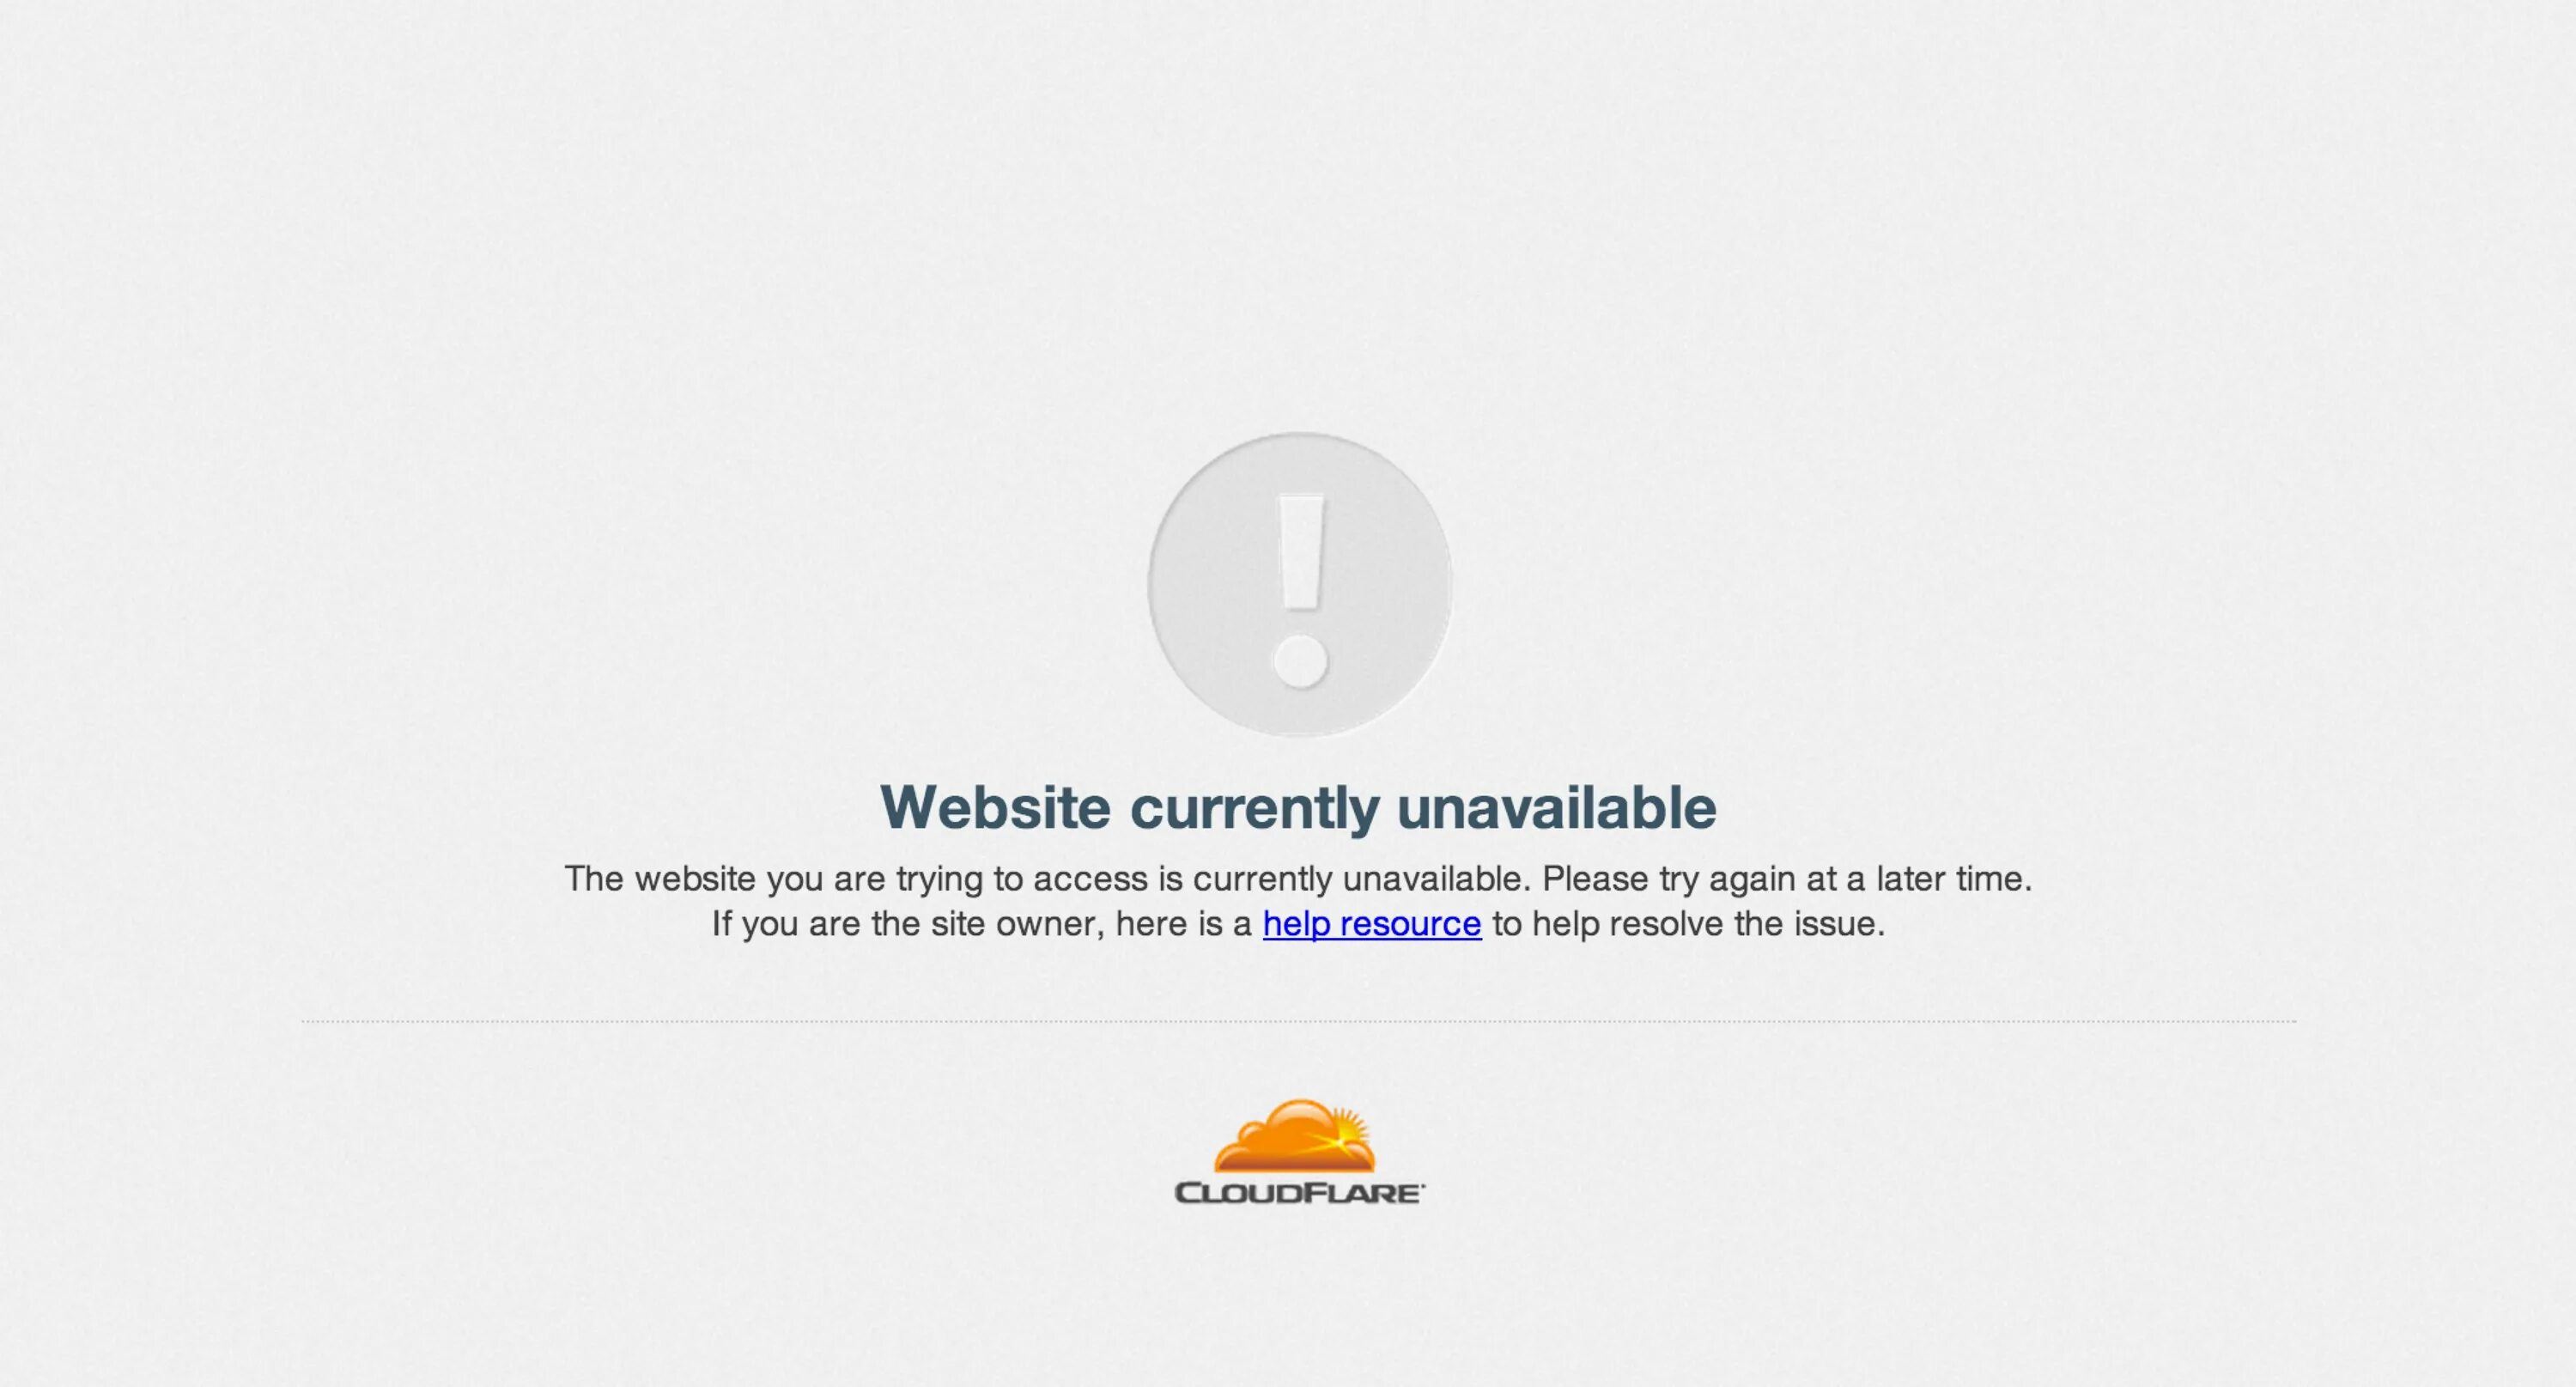 Service unavailable. Currently unavailable. The service is unavailable.. Cloudflare 503 service unavailable. Do this site